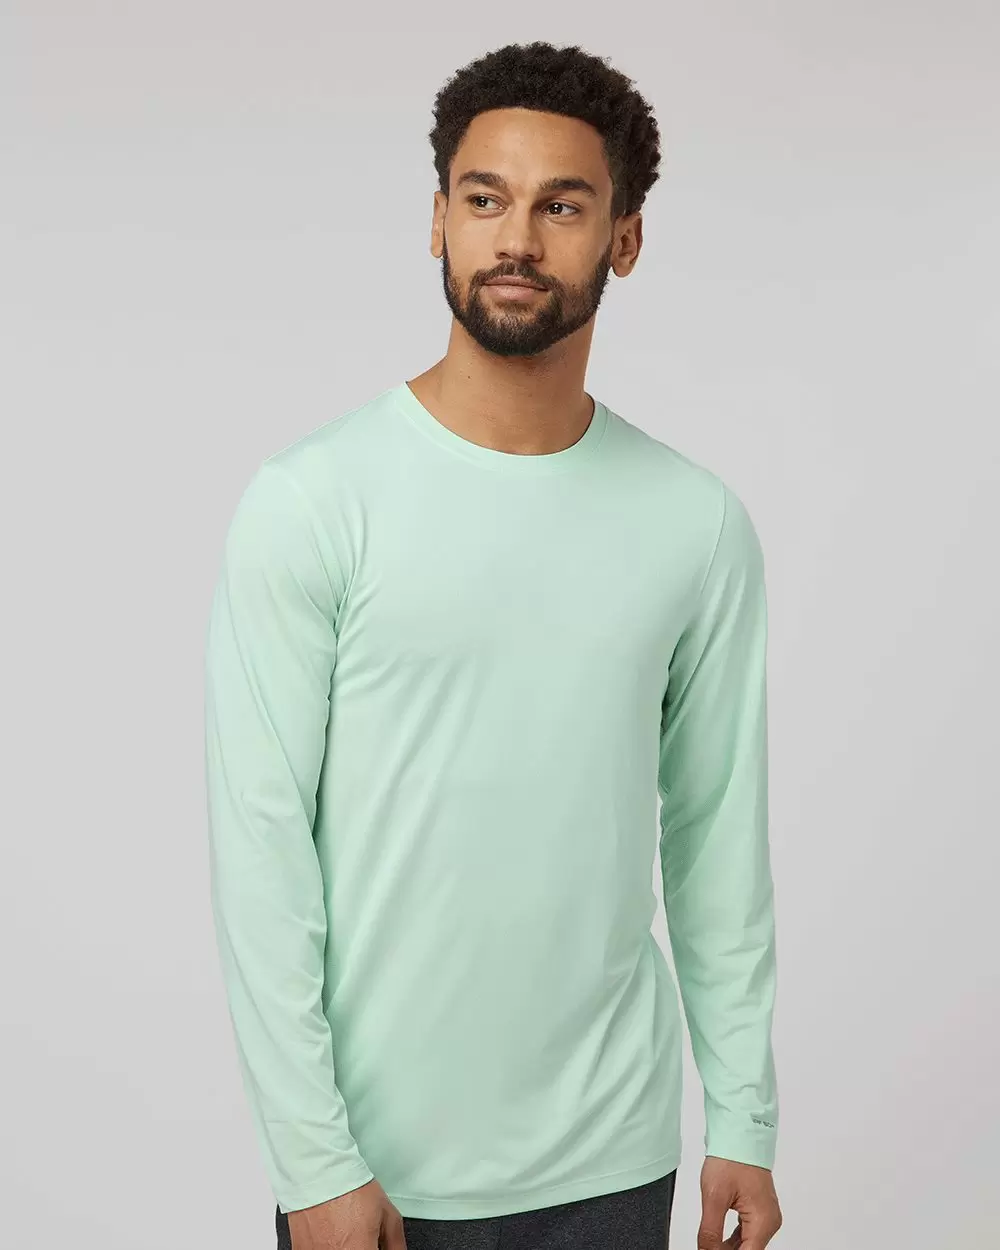 Paragon 222 Aruba Extreme Performance Long Sleeve T-Shirt - From $13.33